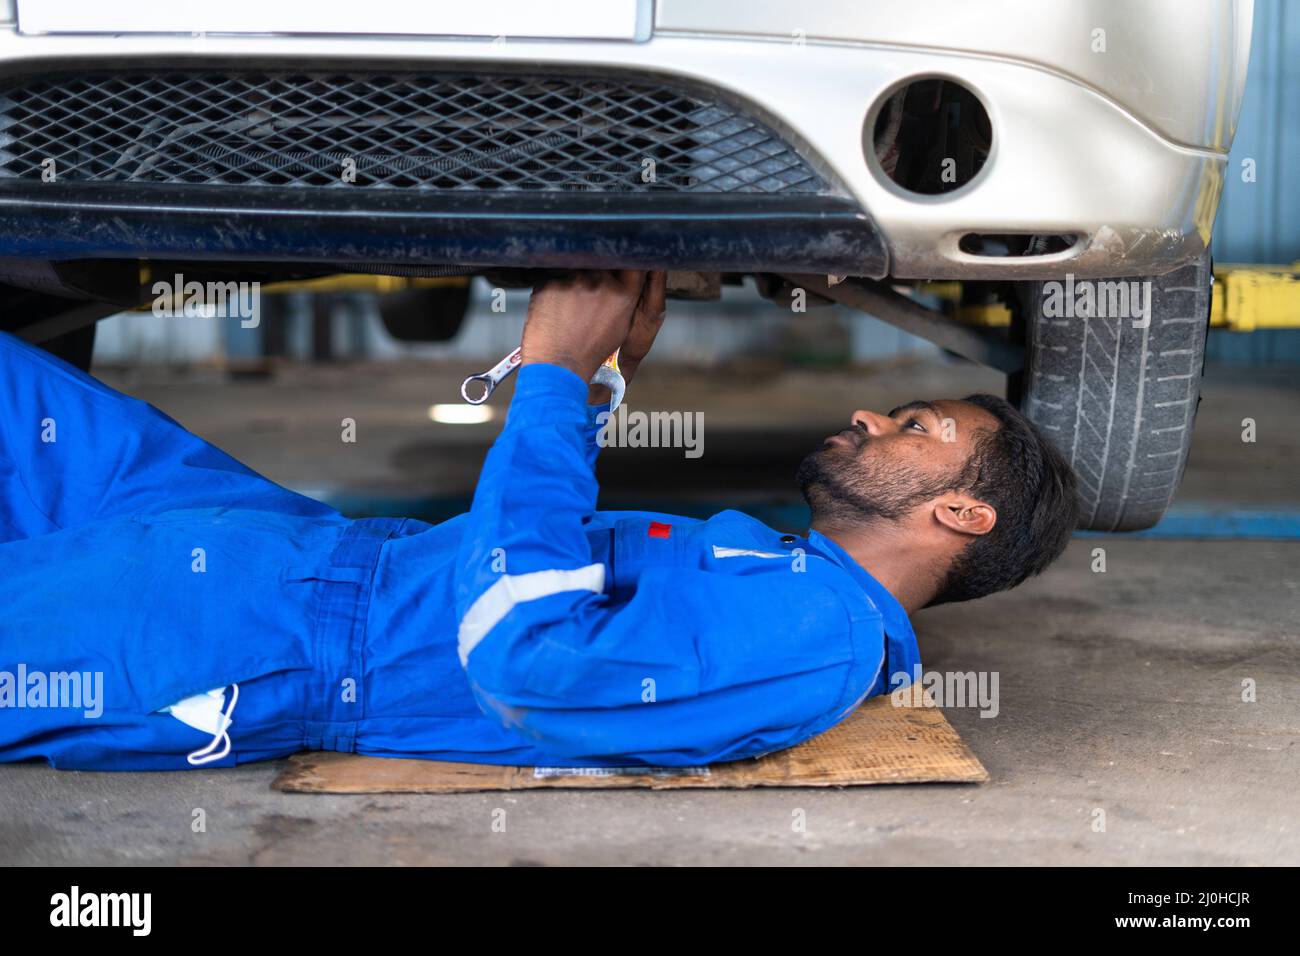 Profgessional car mechanic lying down while working under car at garage - concept of hard worker, skill labour, blue collar jobs and repair service Stock Photo